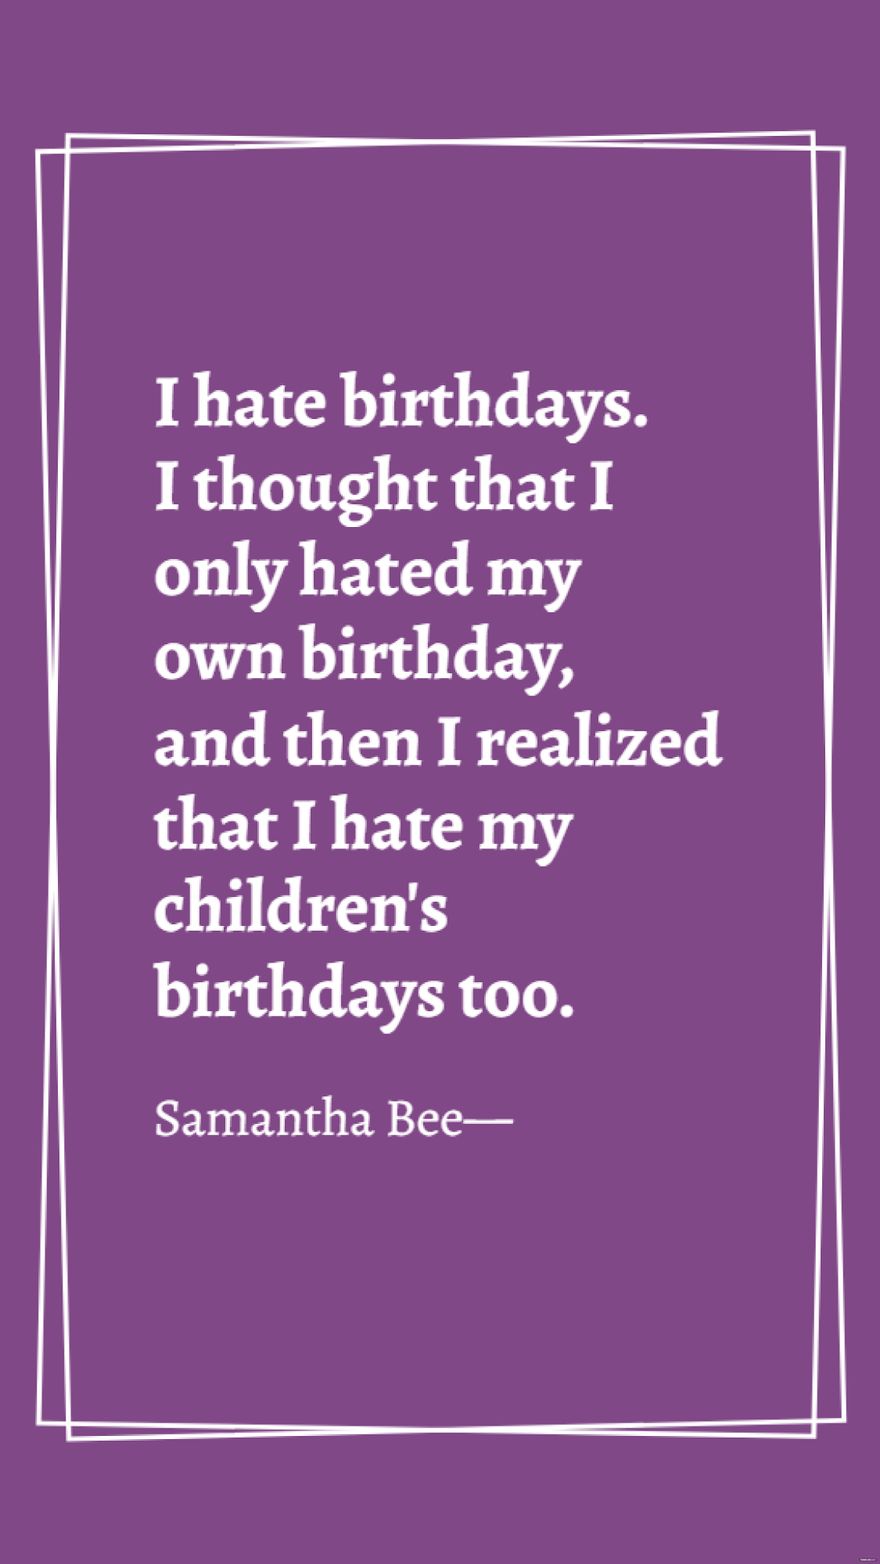 Samantha Bee - I hate birthdays. I thought that I only hated my own birthday, and then I realized that I hate my children's birthdays too.